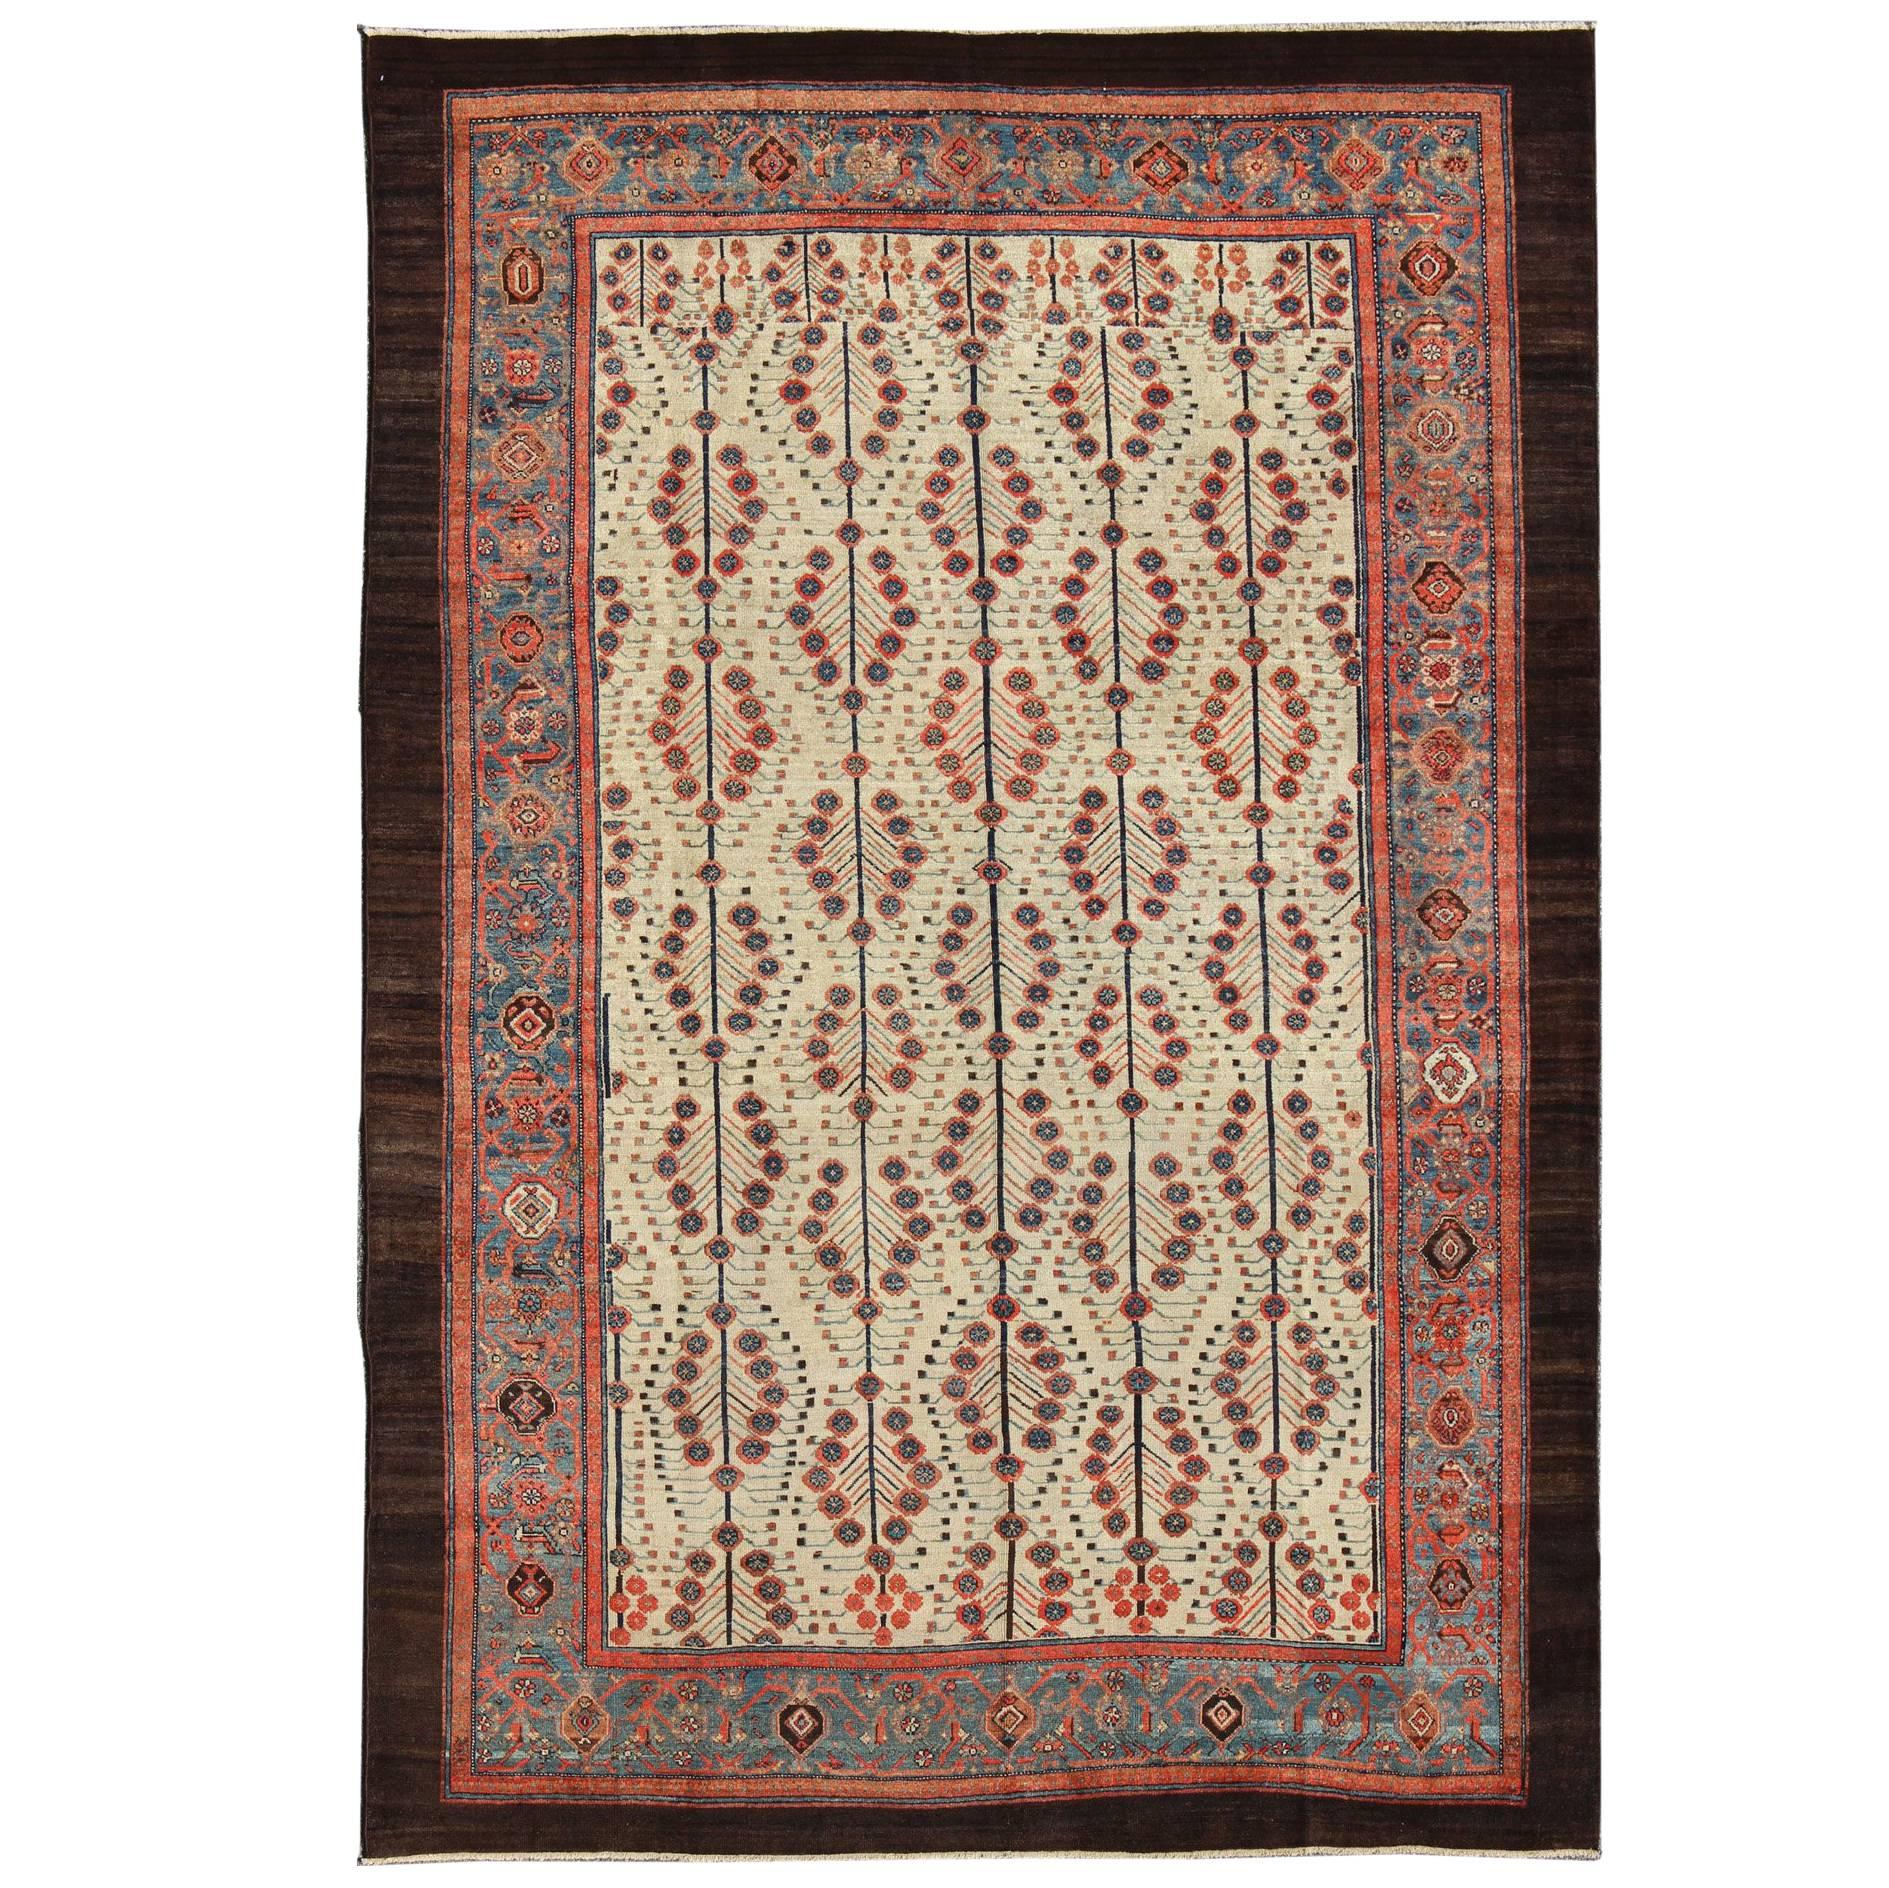 Antique Persian Serab Rug with Tree Design in Cream, Red, Blue and Brown Colors